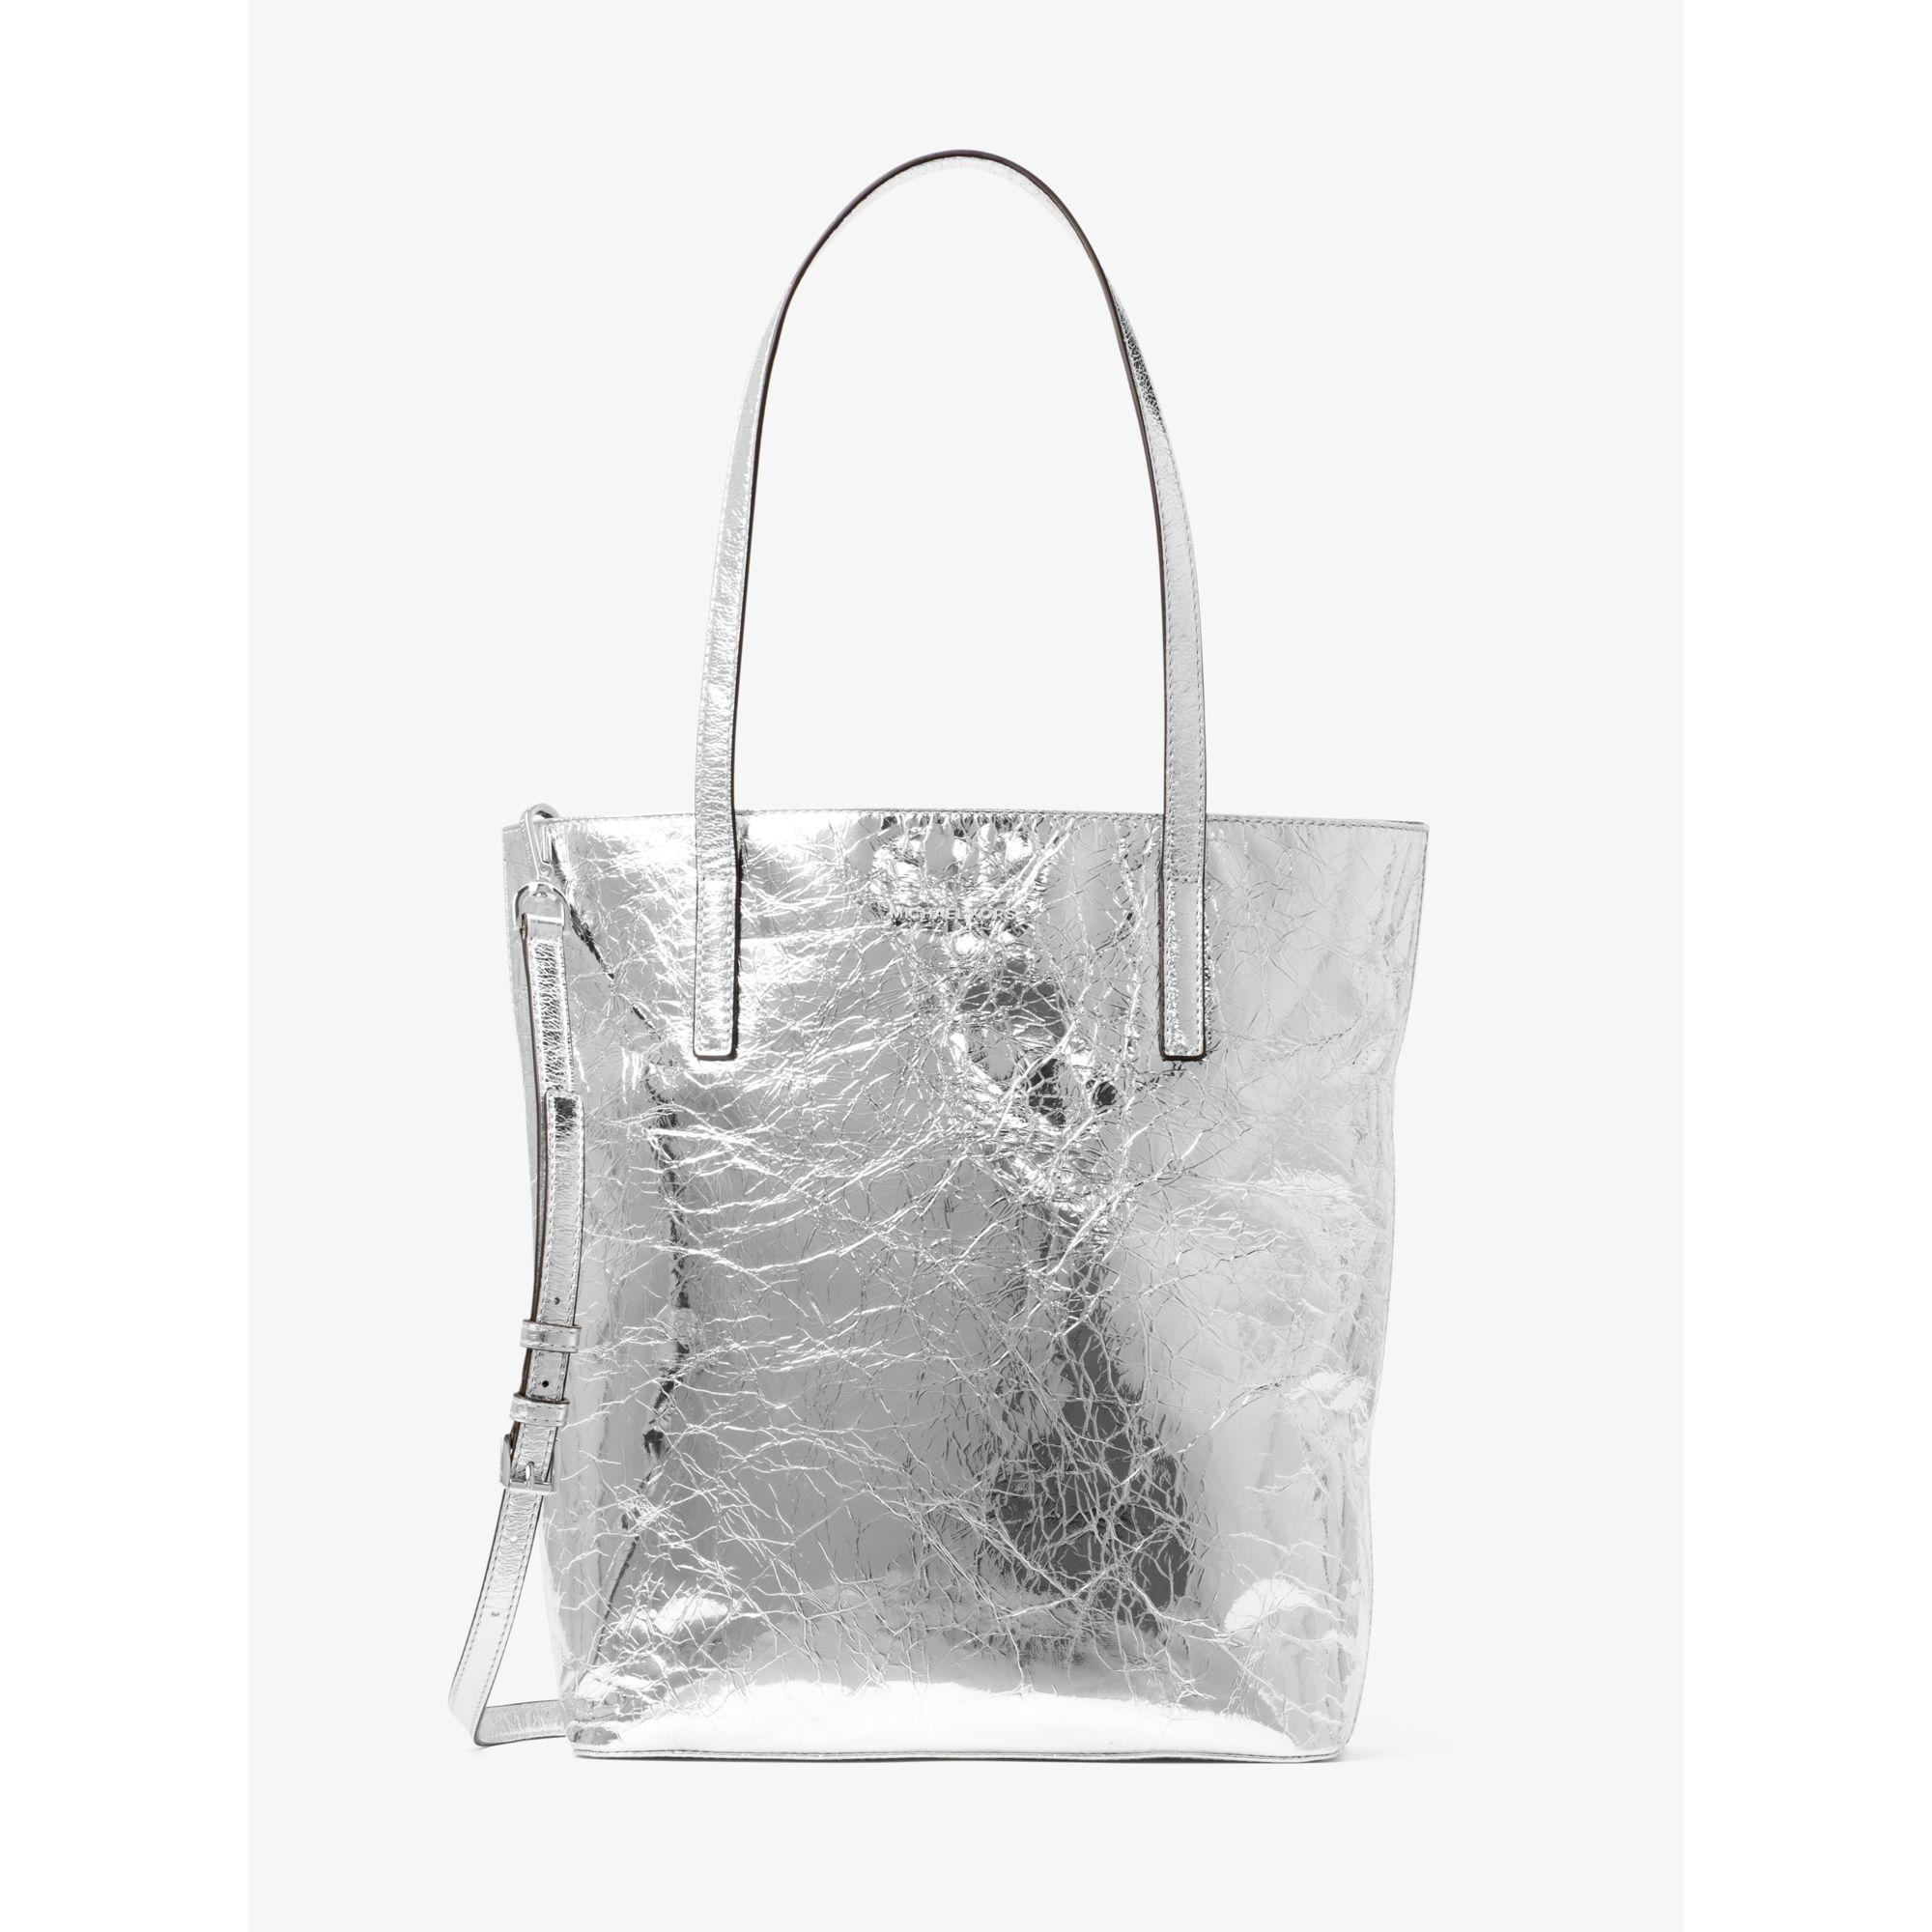 Michael Kors Emry Large Crinkled-leather Tote Bag in Silver (Metallic) -  Lyst